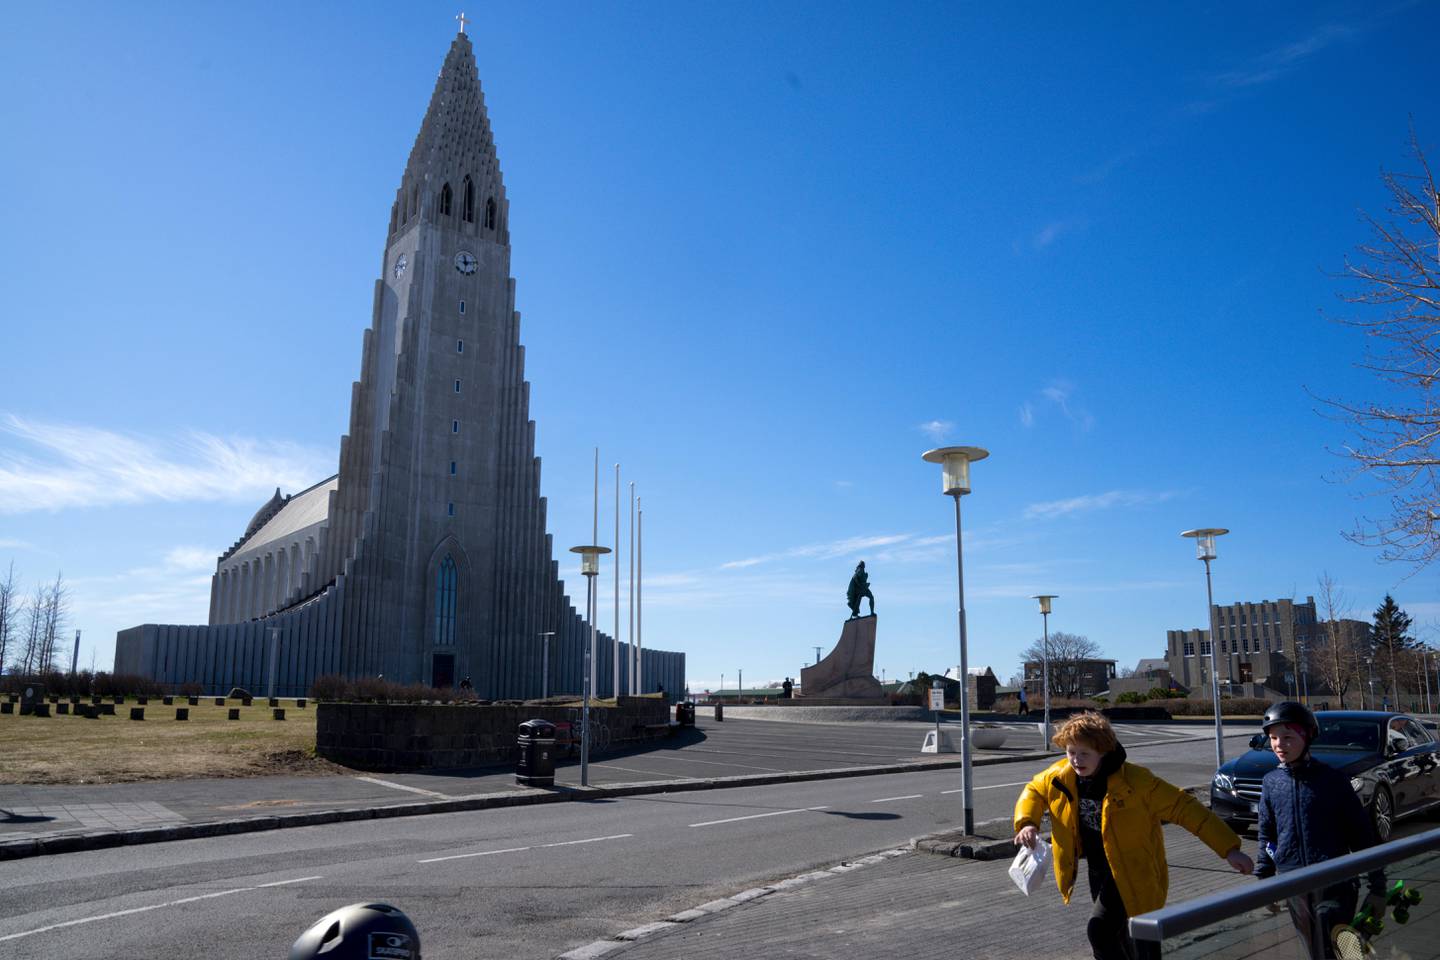 In this photo taken on Wednesday, April 29, 2020, two local boys walk past the the empty plaza of Hallgrimskirkja Church, a popular tourist destination in downtown Reykjavik. High schools, dentists and hair salons are about to reopen in Iceland, which has managed to get a grip on the coronavirus through the worlds most extensive regime of testing. By identifying infected people even when they had no symptoms, the tiny North Atlantic nation managed to identify and isolate cases where many bigger countries have struggled. (AP Photo/Egill Bjarnason)